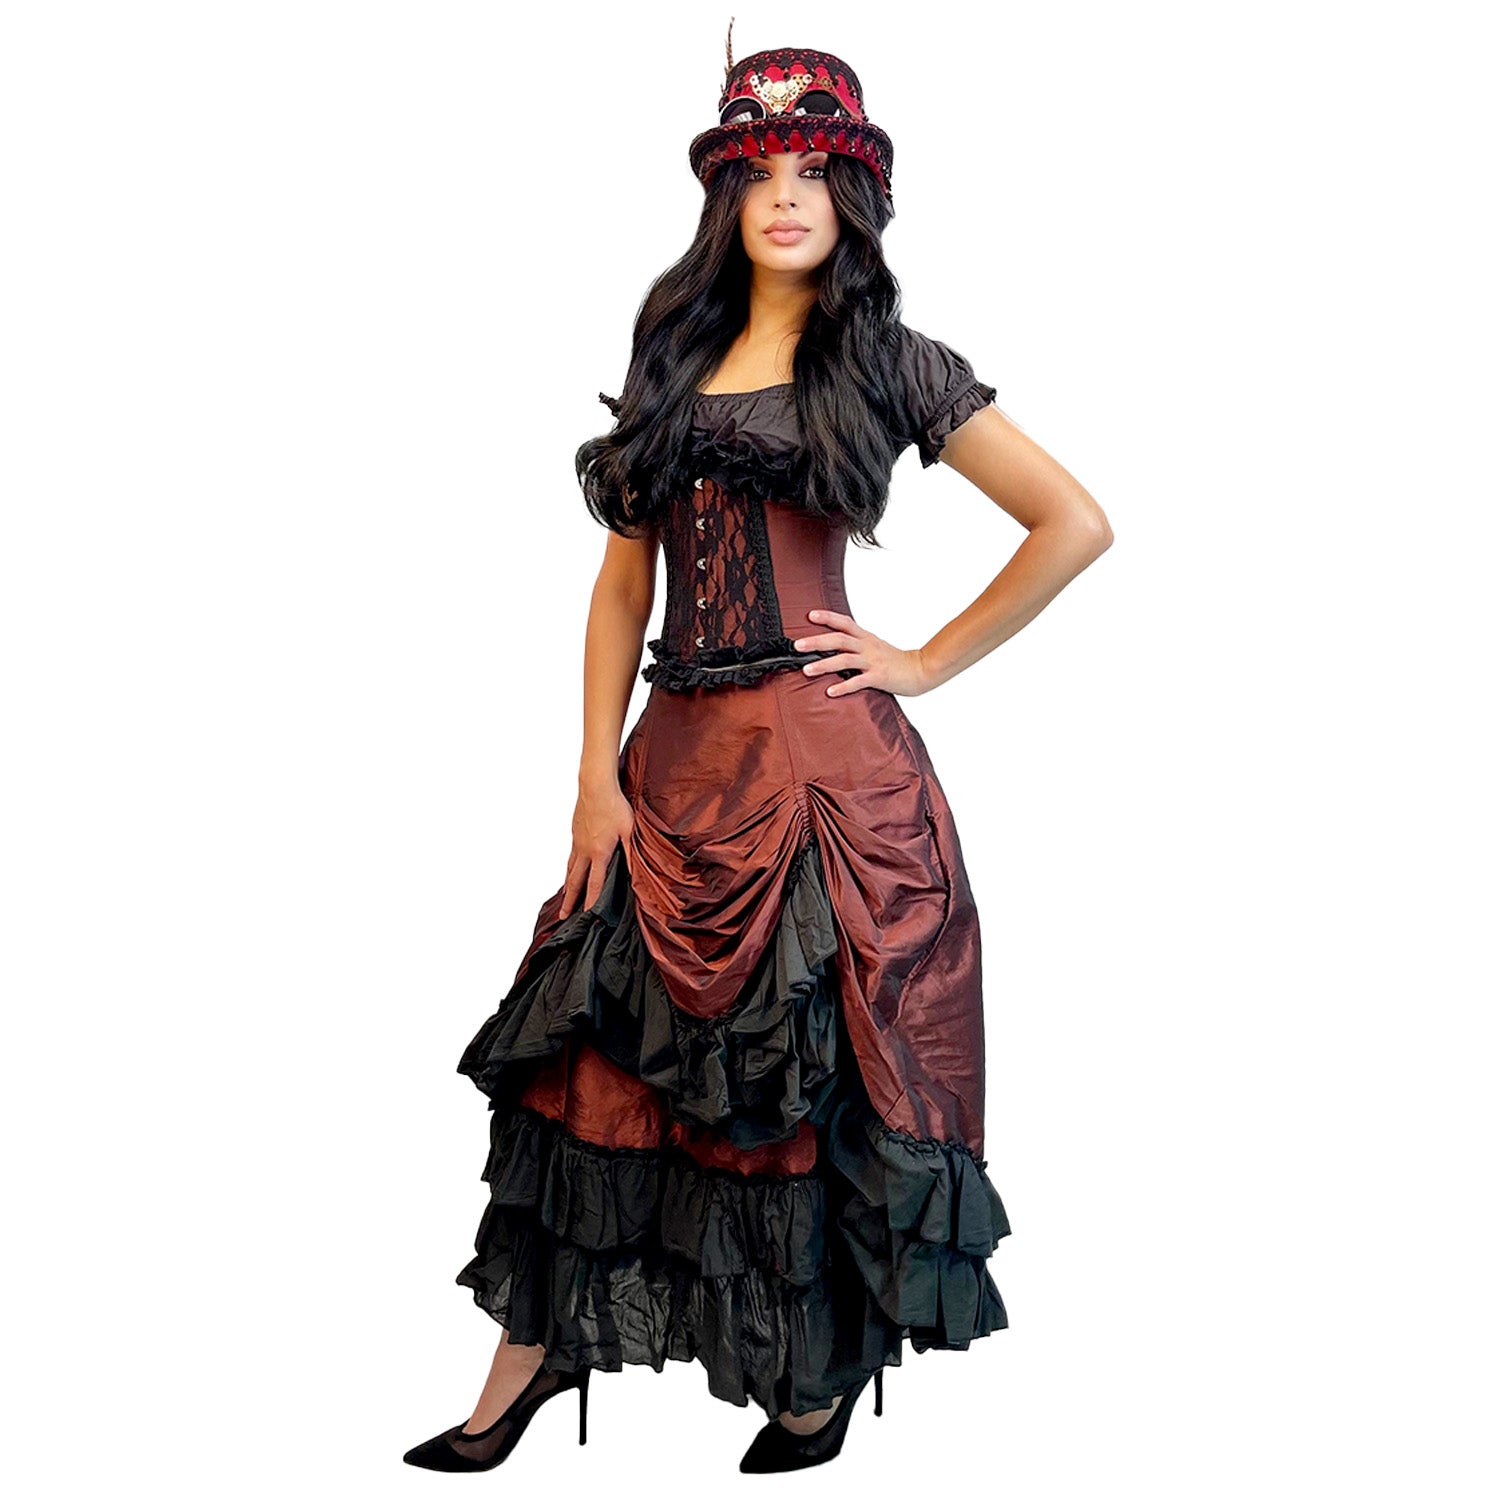 Mysterious Lady Under-bust Corset - renaissance clothing, medieval, costume